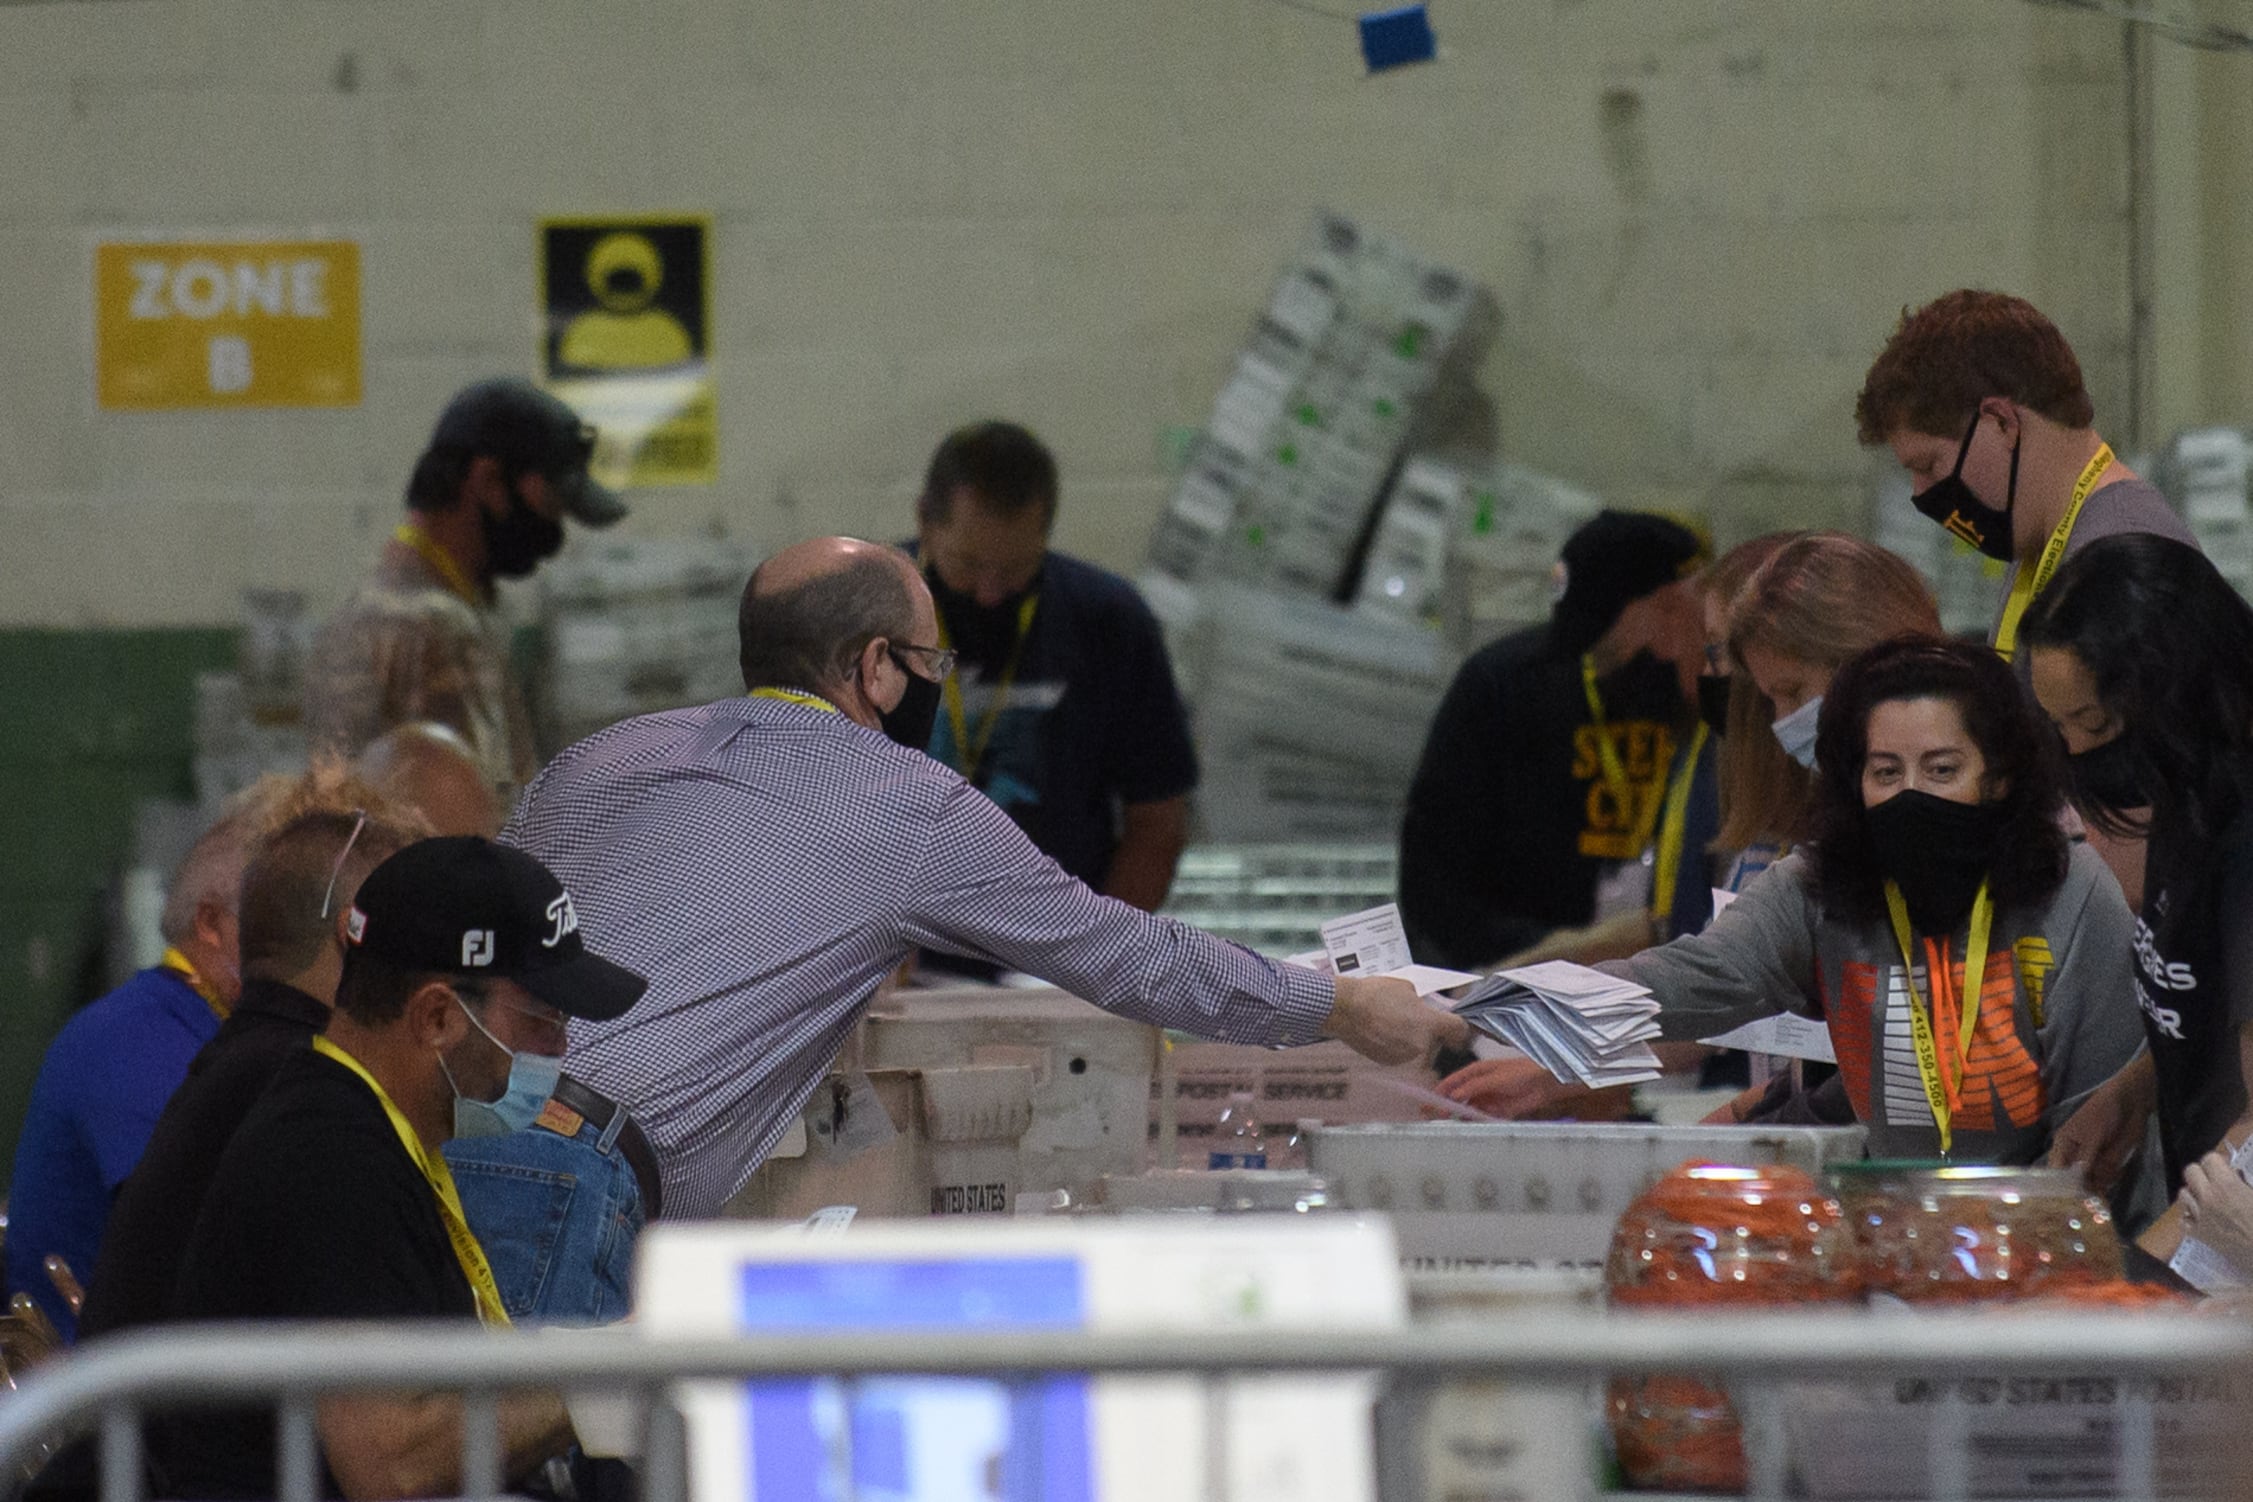 A group of people reach over a large, cluttered table, passing ballots to each other.